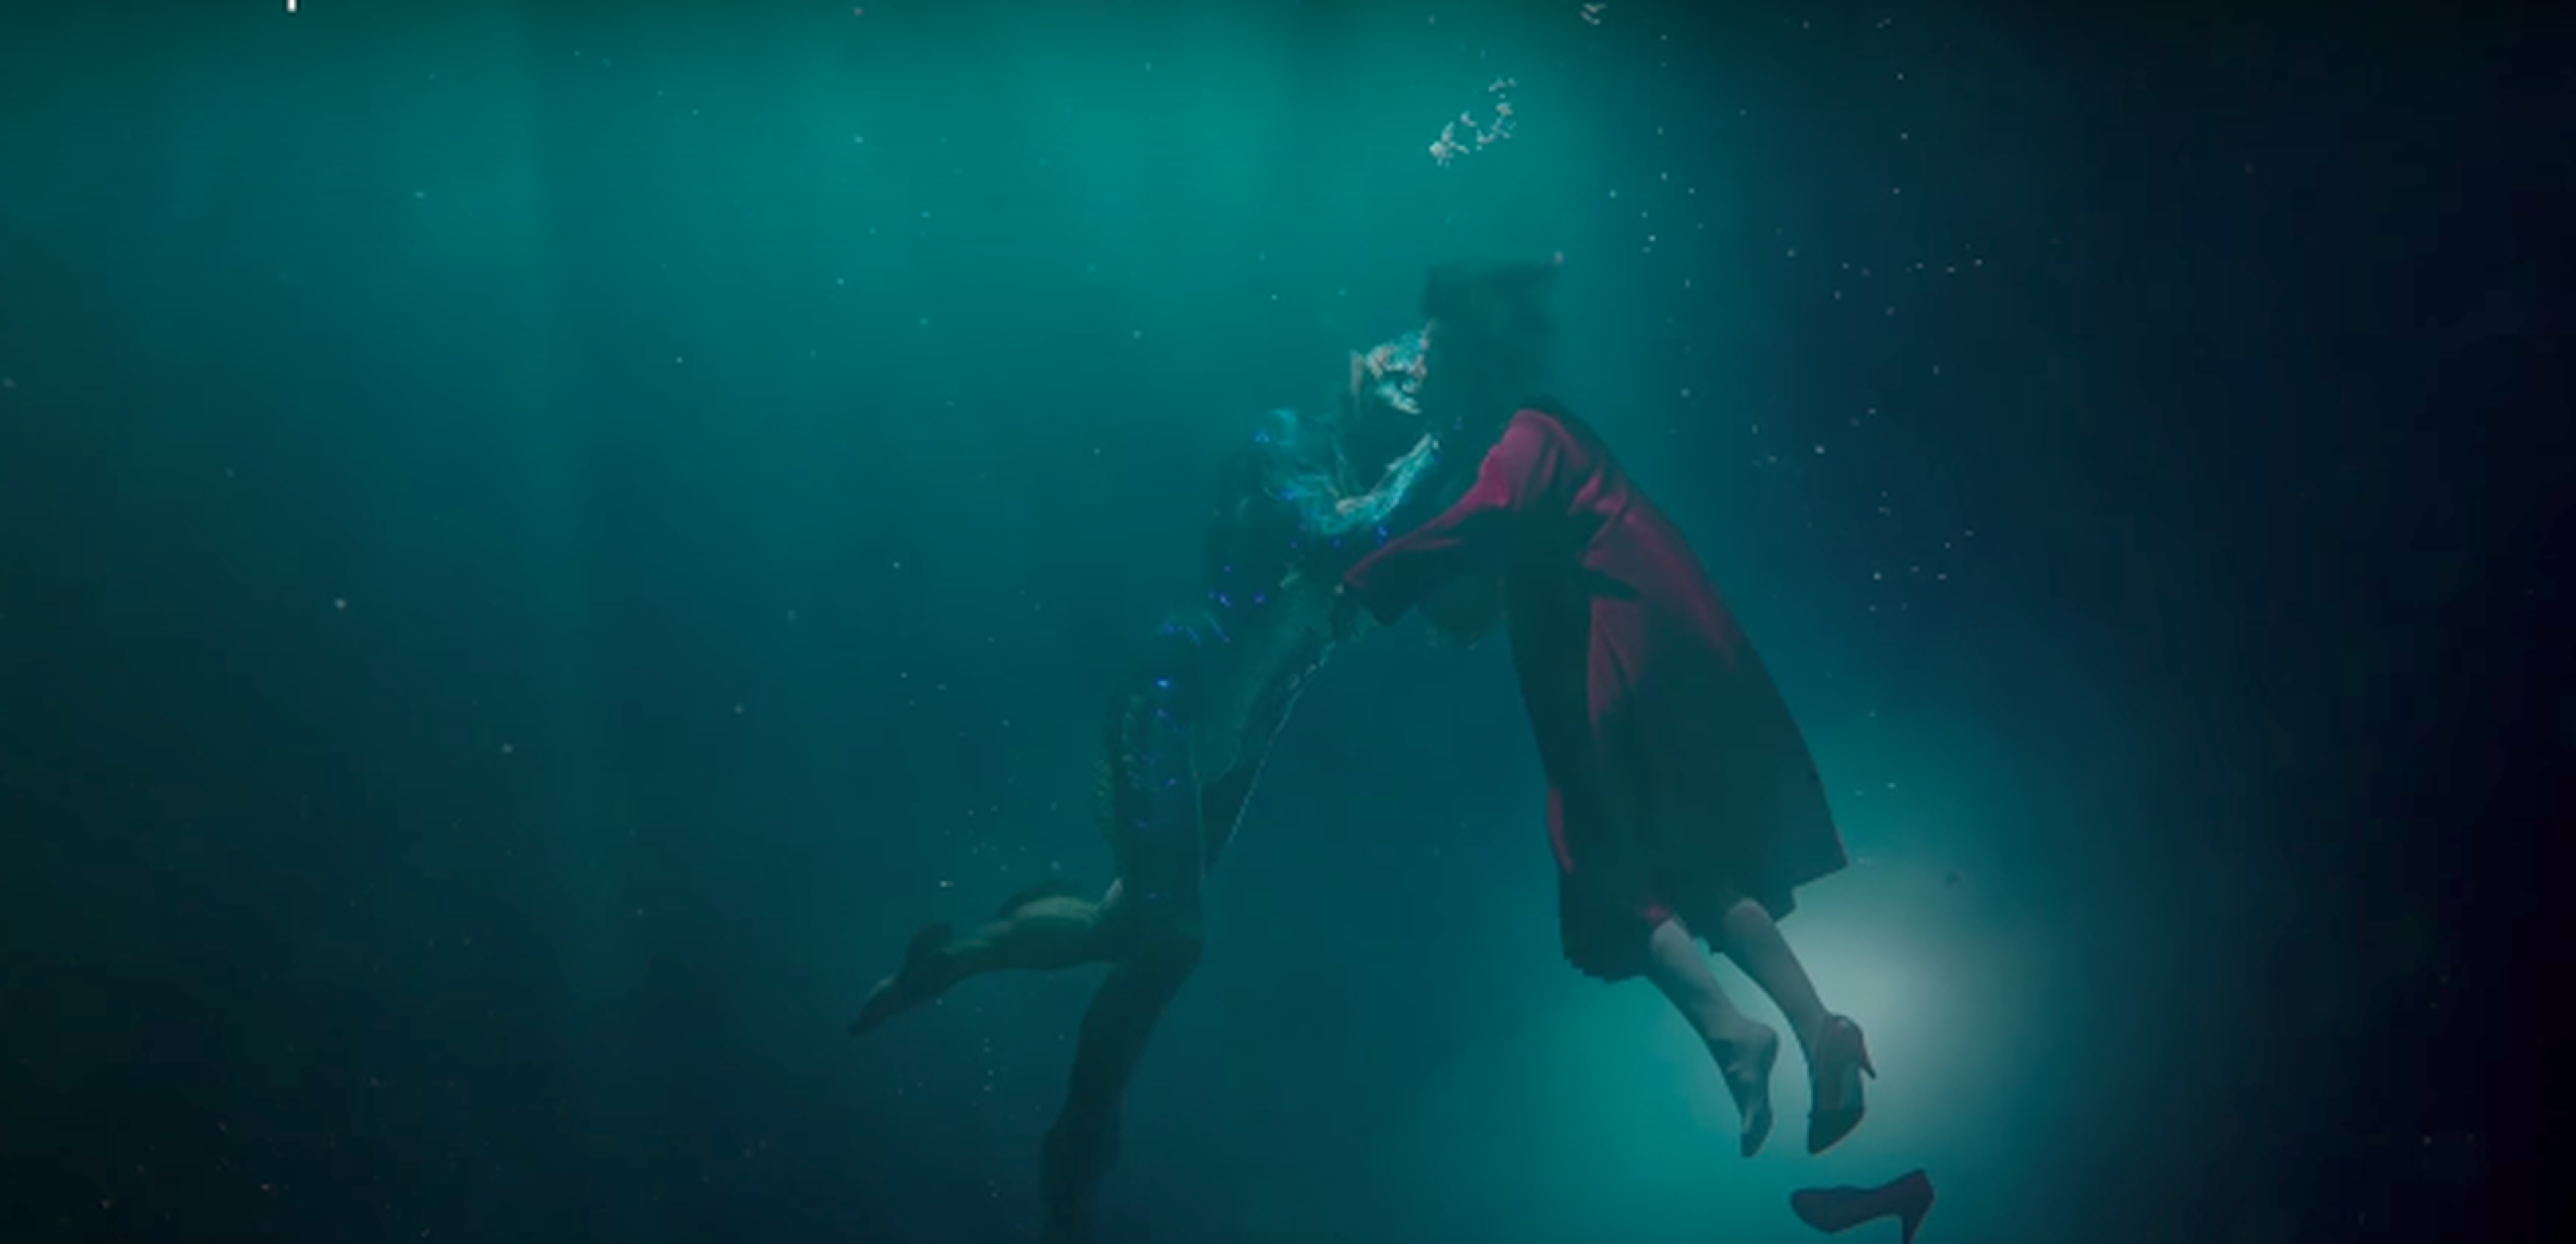 The shape of water - Primer tráiler oficial